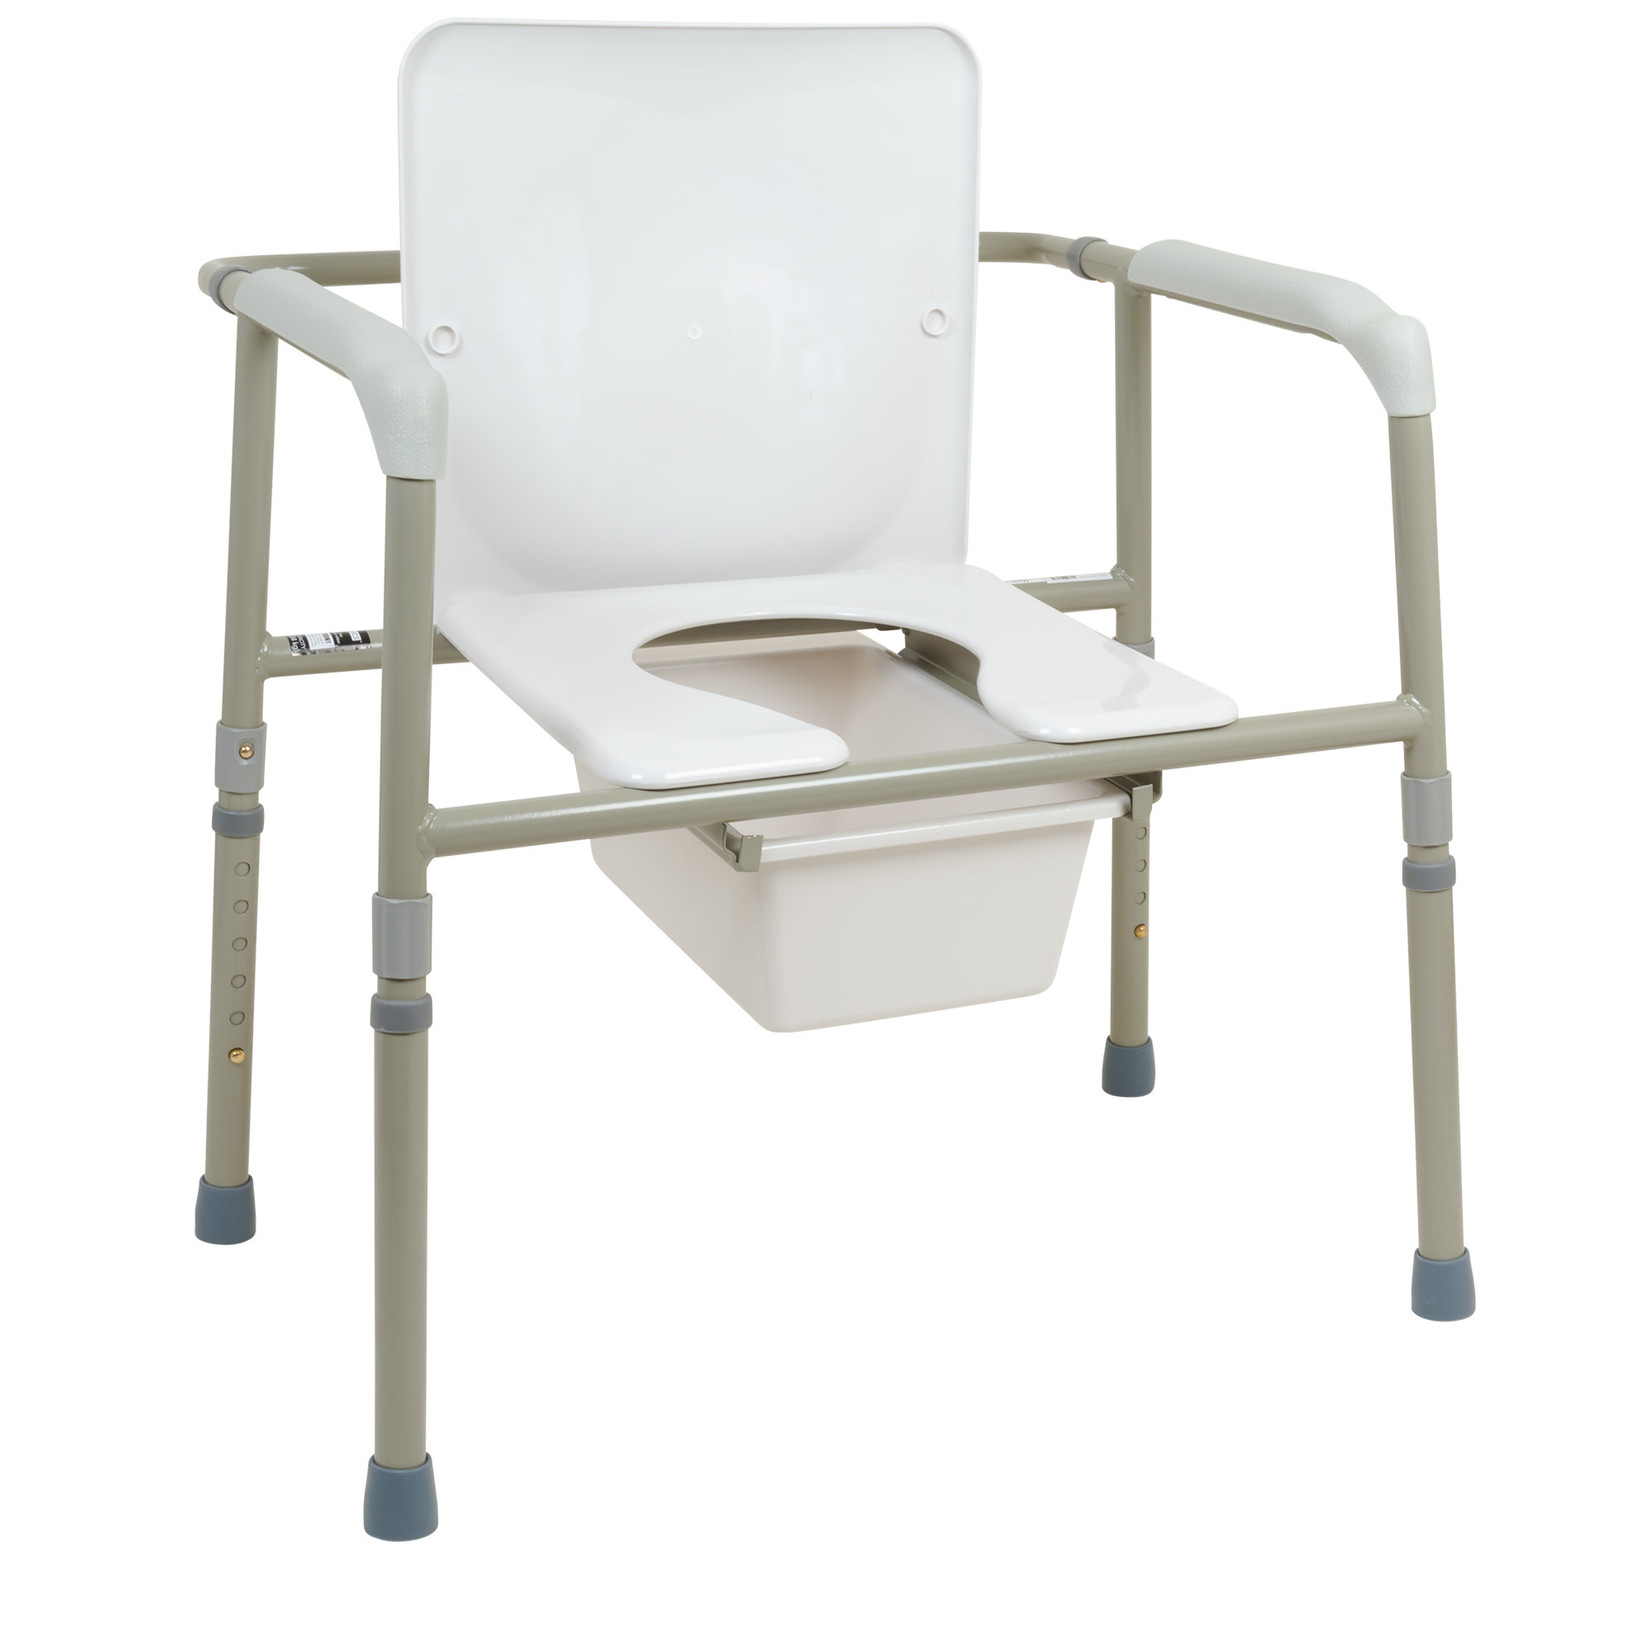 ProBasics Three-in-One Bariatric Commode, 450lb Weight Capacity